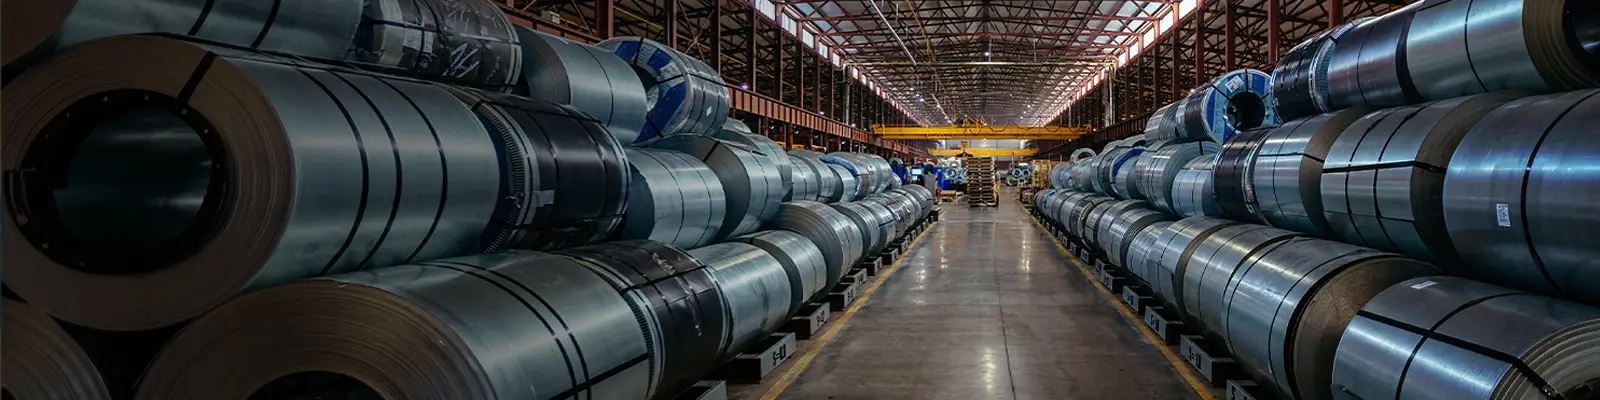 Wire and Cable in US Steel Mills